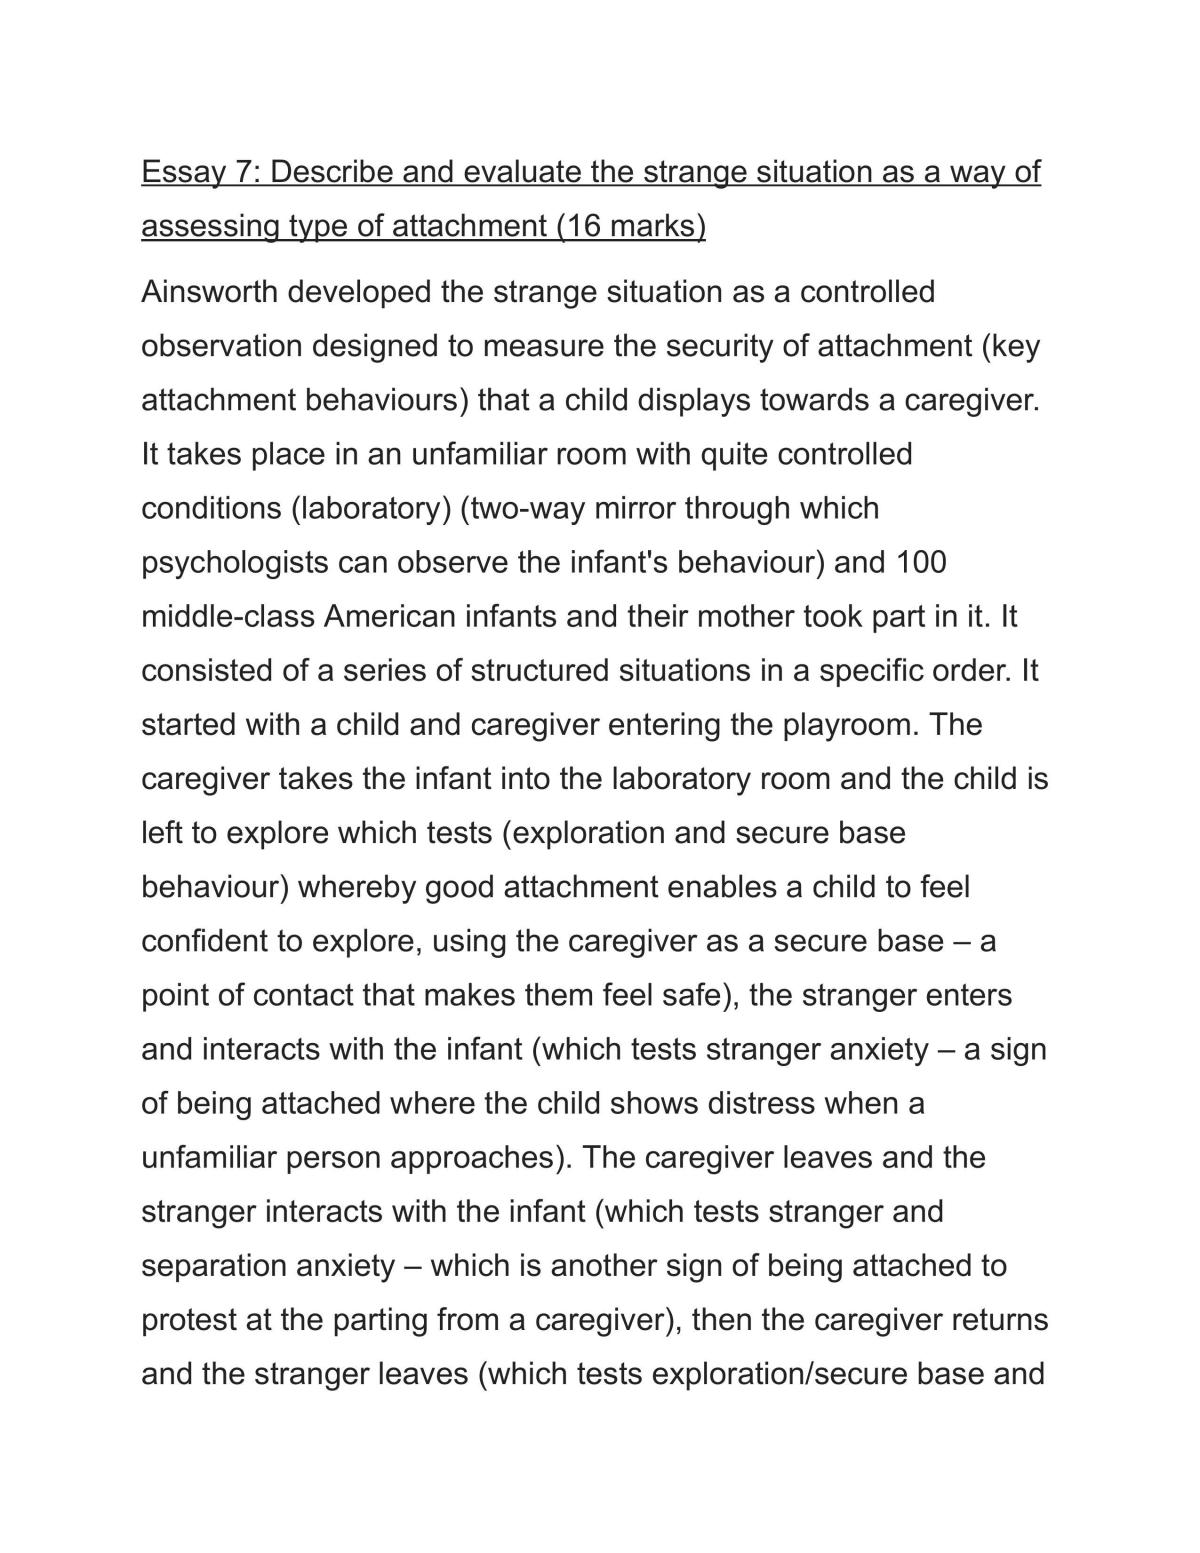 Attachment - Describe and evaluate the strange situation as a way of assessing type of infant attachment to the caregiver - Page 1